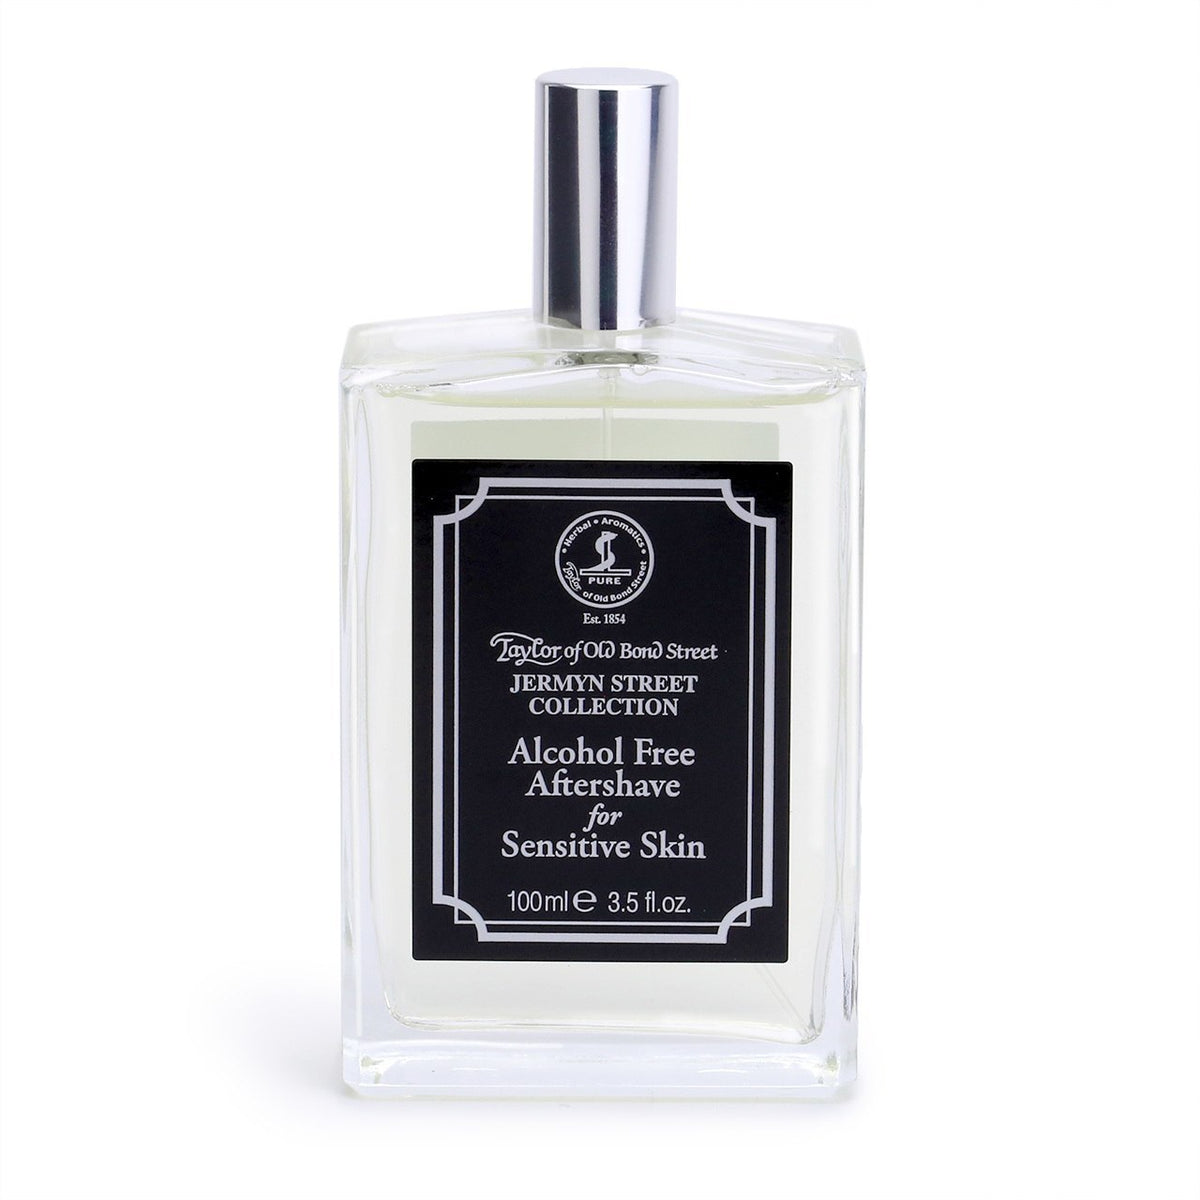 Taylor of Old Bond Street Alcohol Free Aftershave Lotion 100ml - Jermyn Street